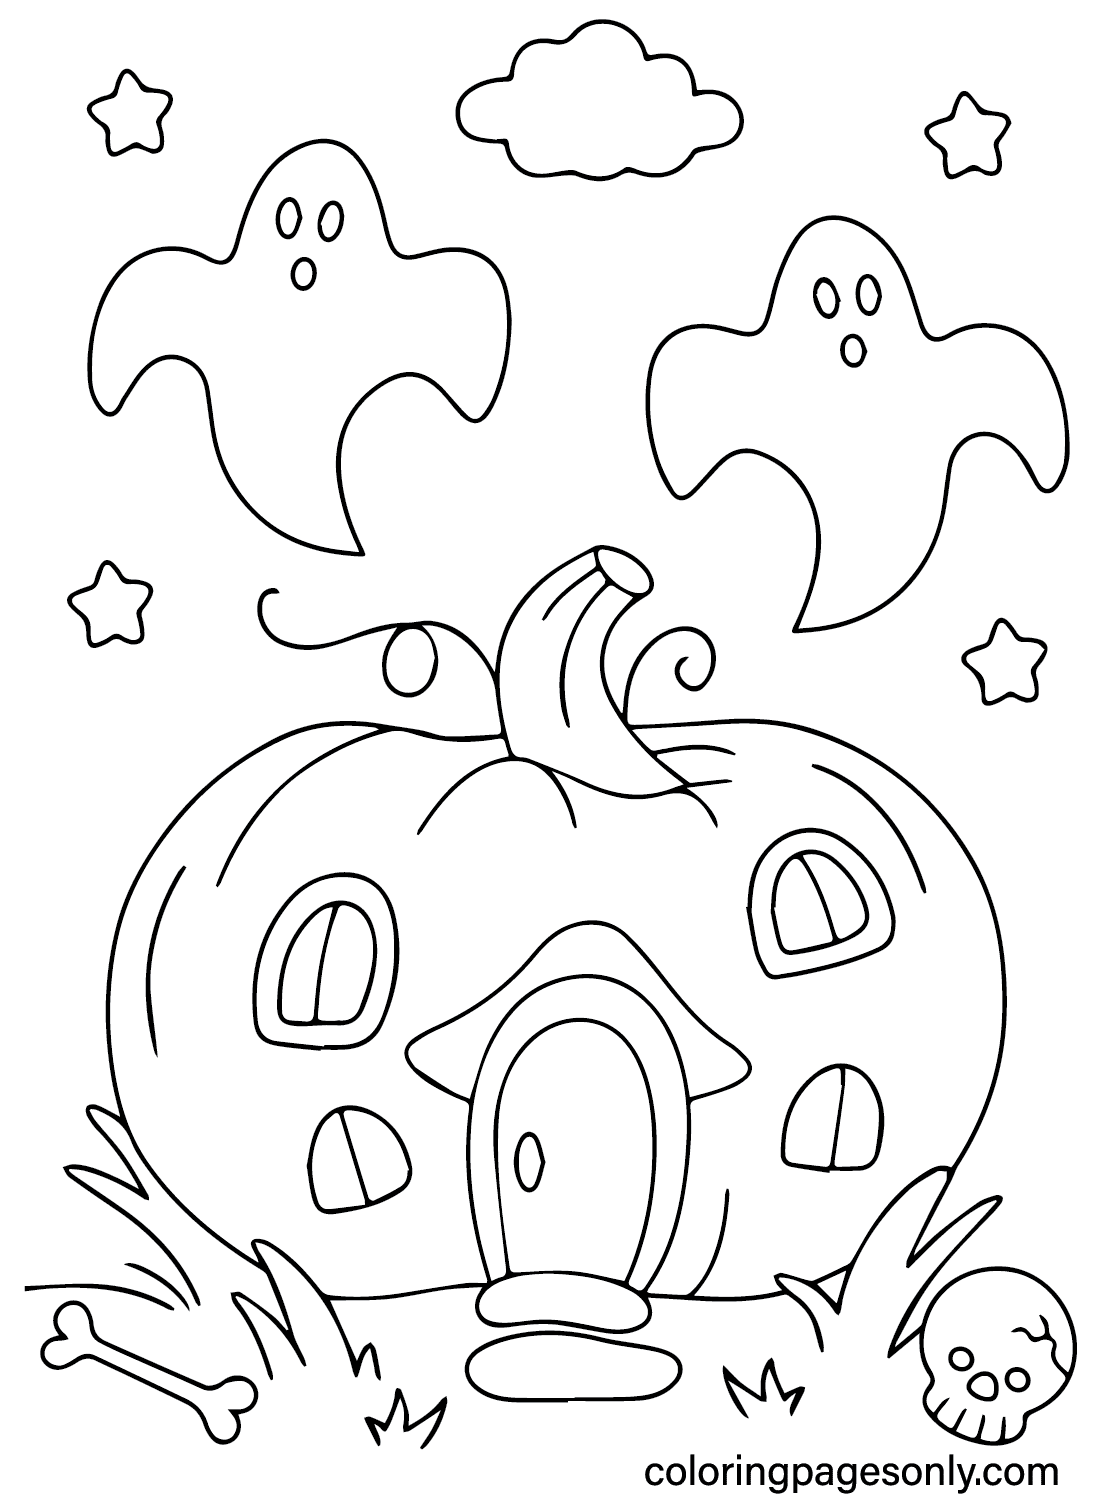 Cute Printable Halloween Coloring Page - Free Printable Coloring Pages